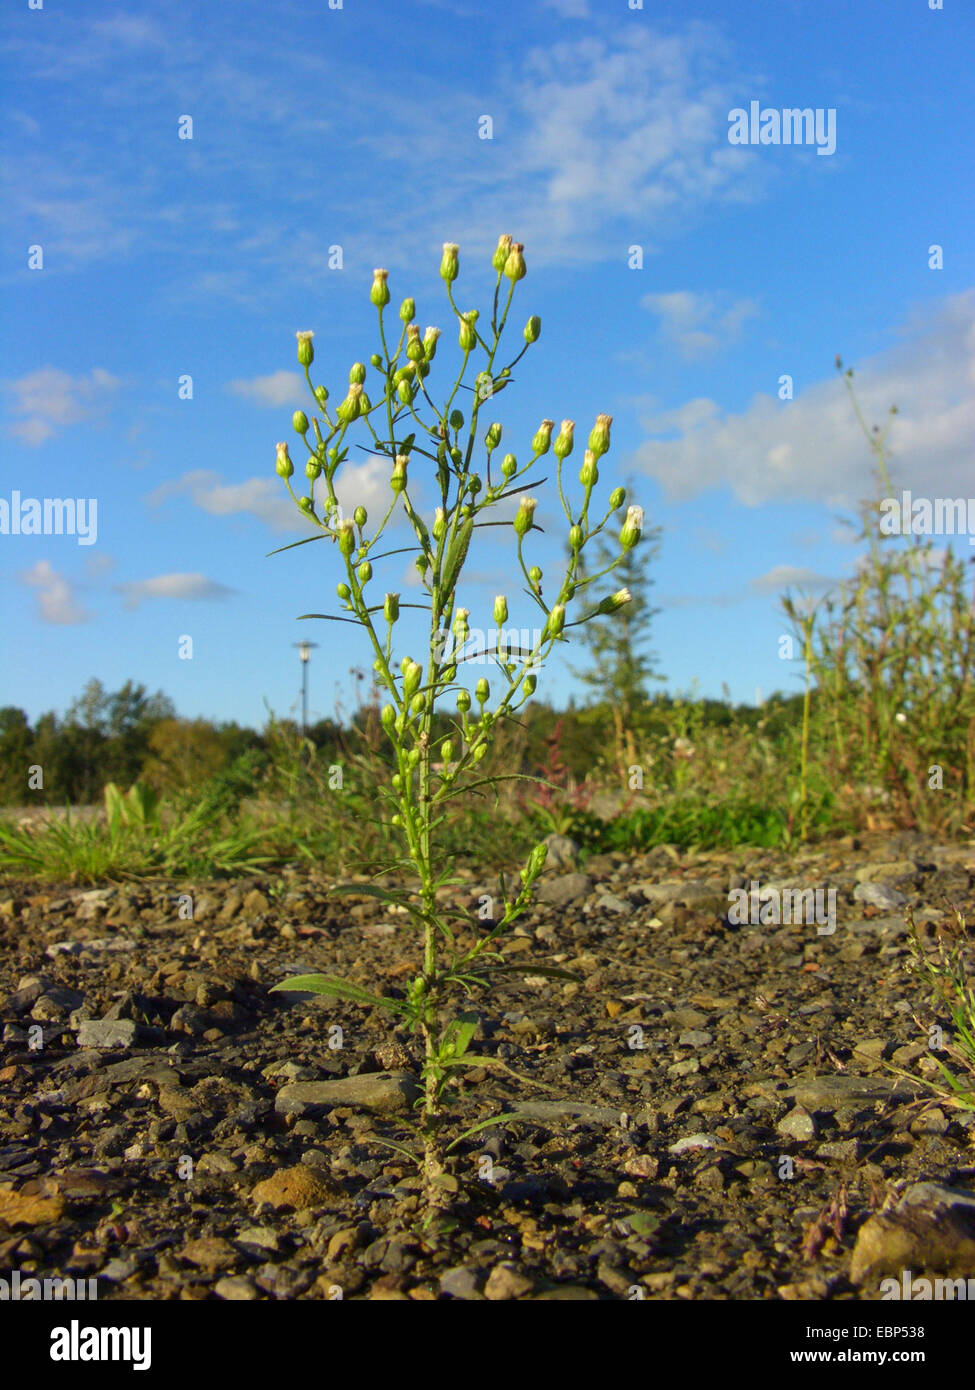 horseweed, Canadian fleabane (Conyza canadensis, Erigeron canadensis), blooming on industrial ground, Germany Stock Photo